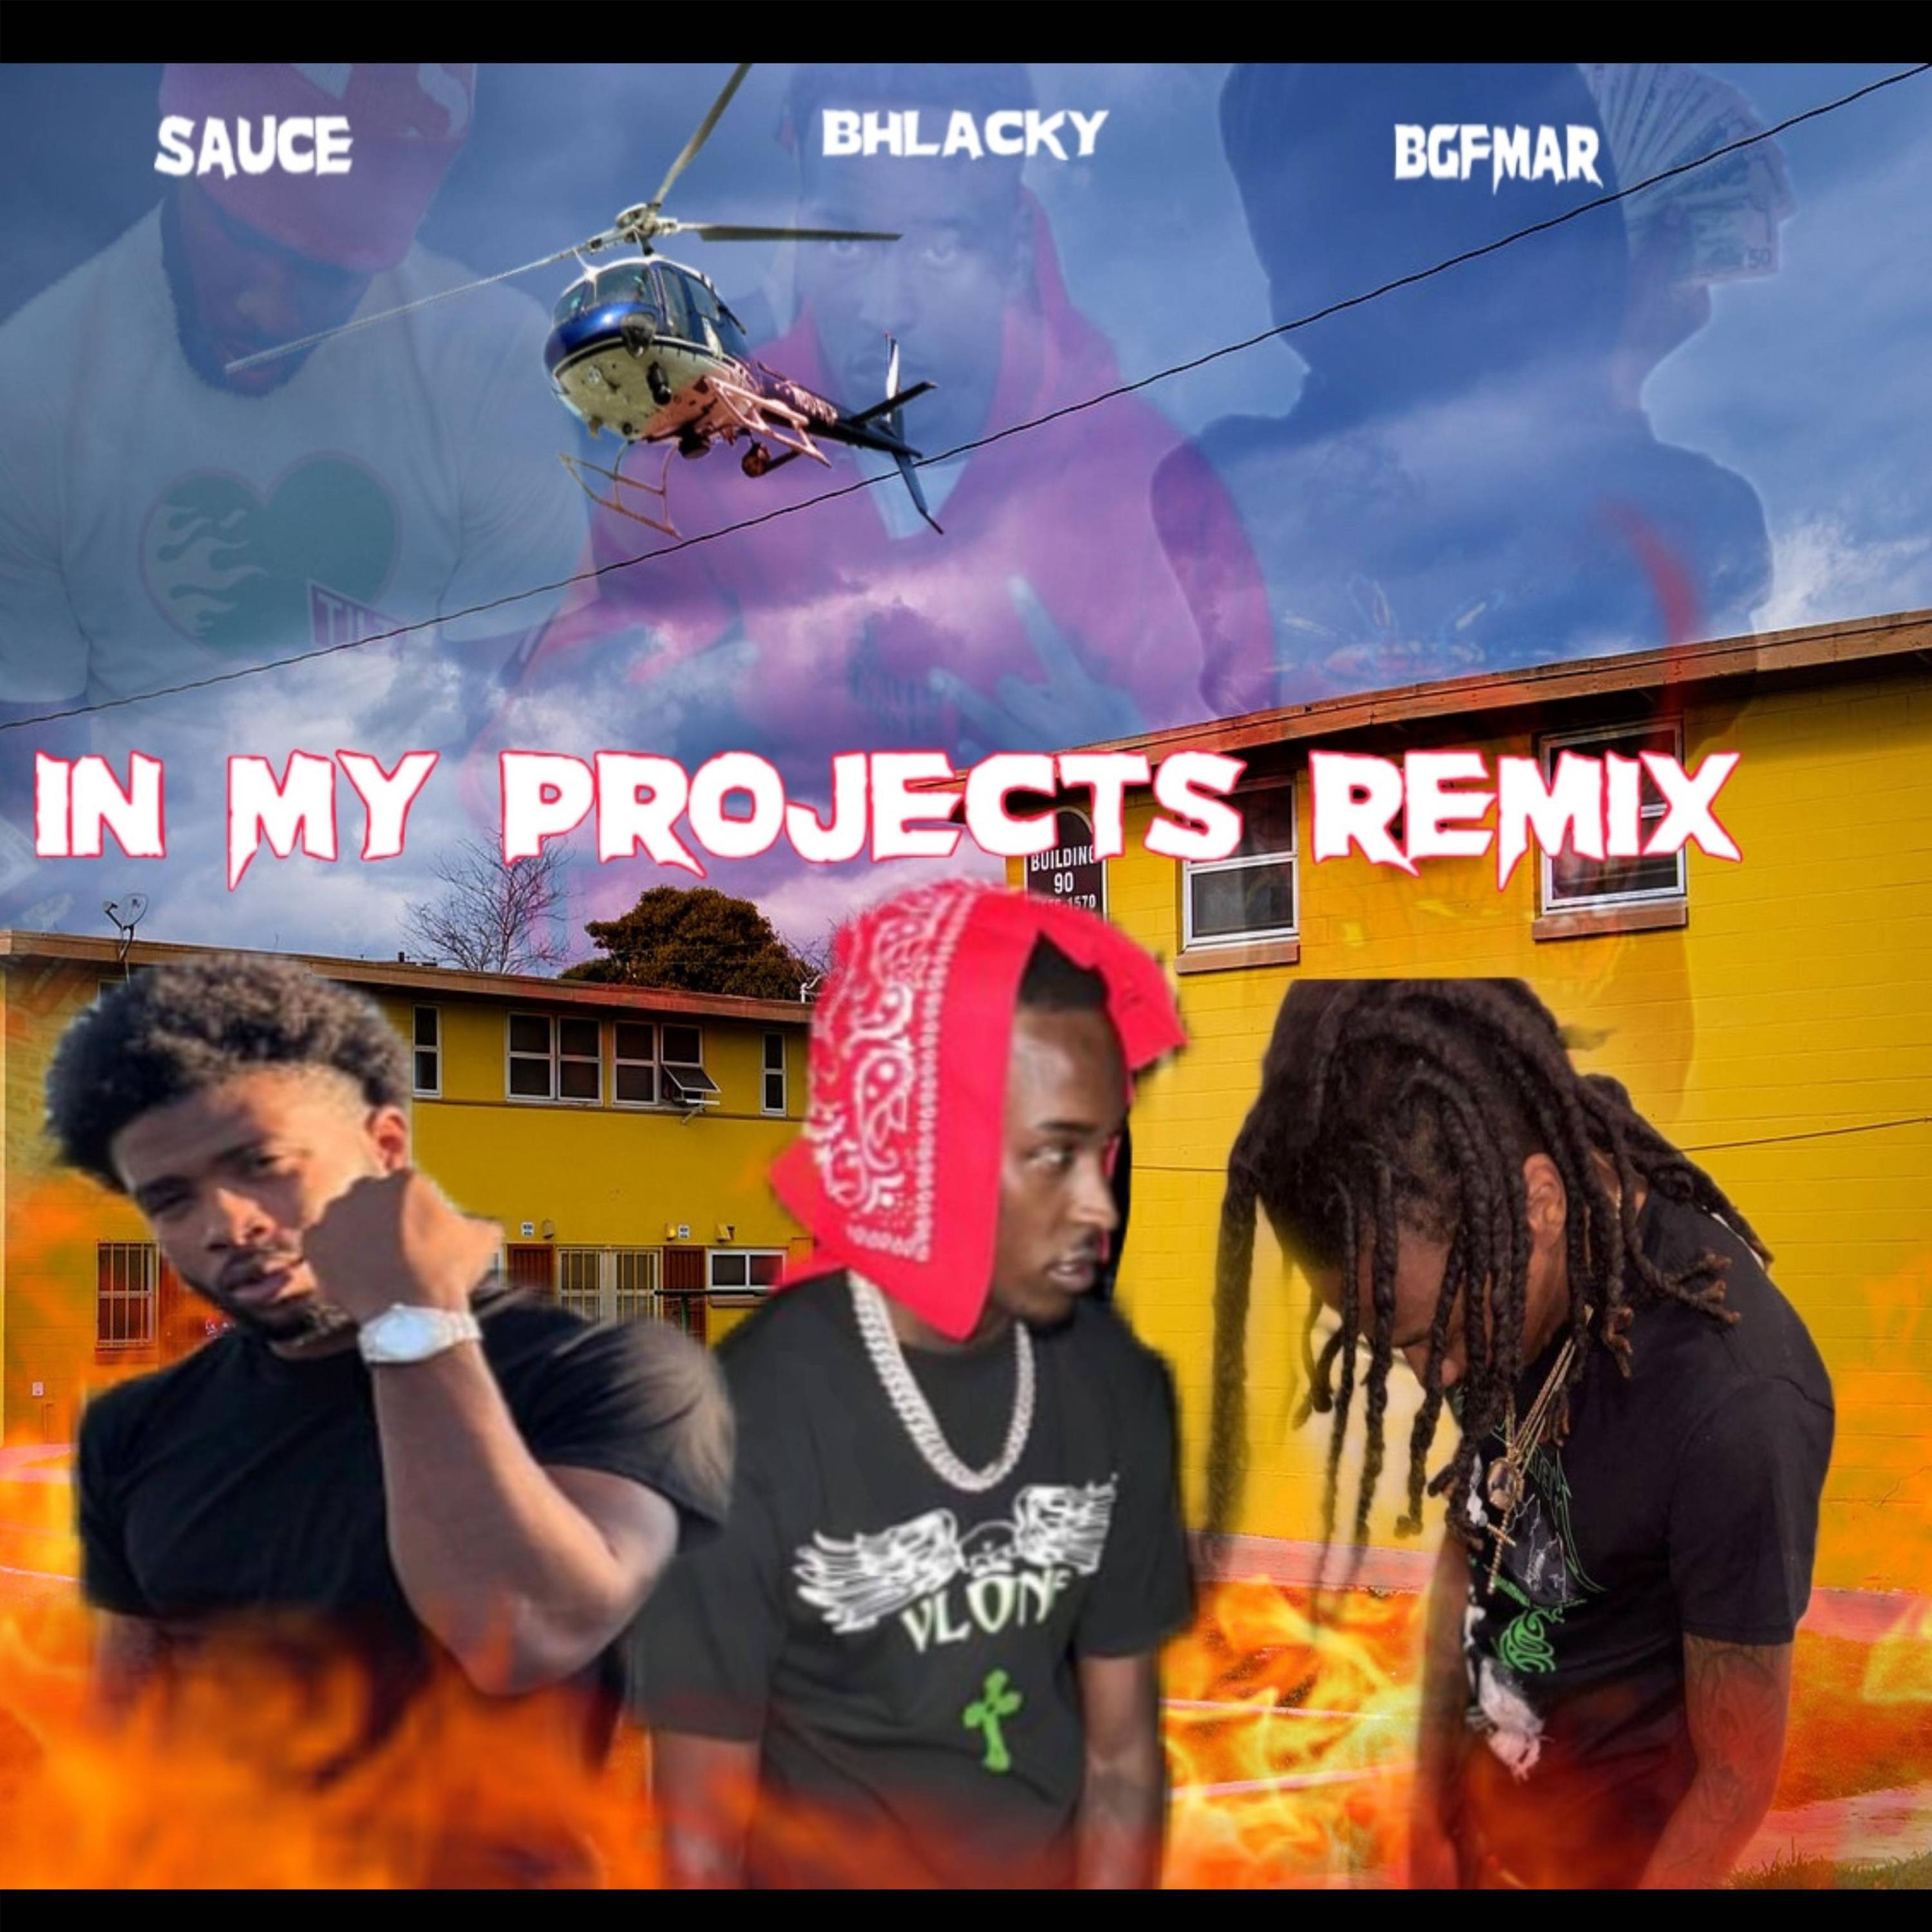 BgfMar - In Ma Projects (feat. Bhlacky & Sauce)